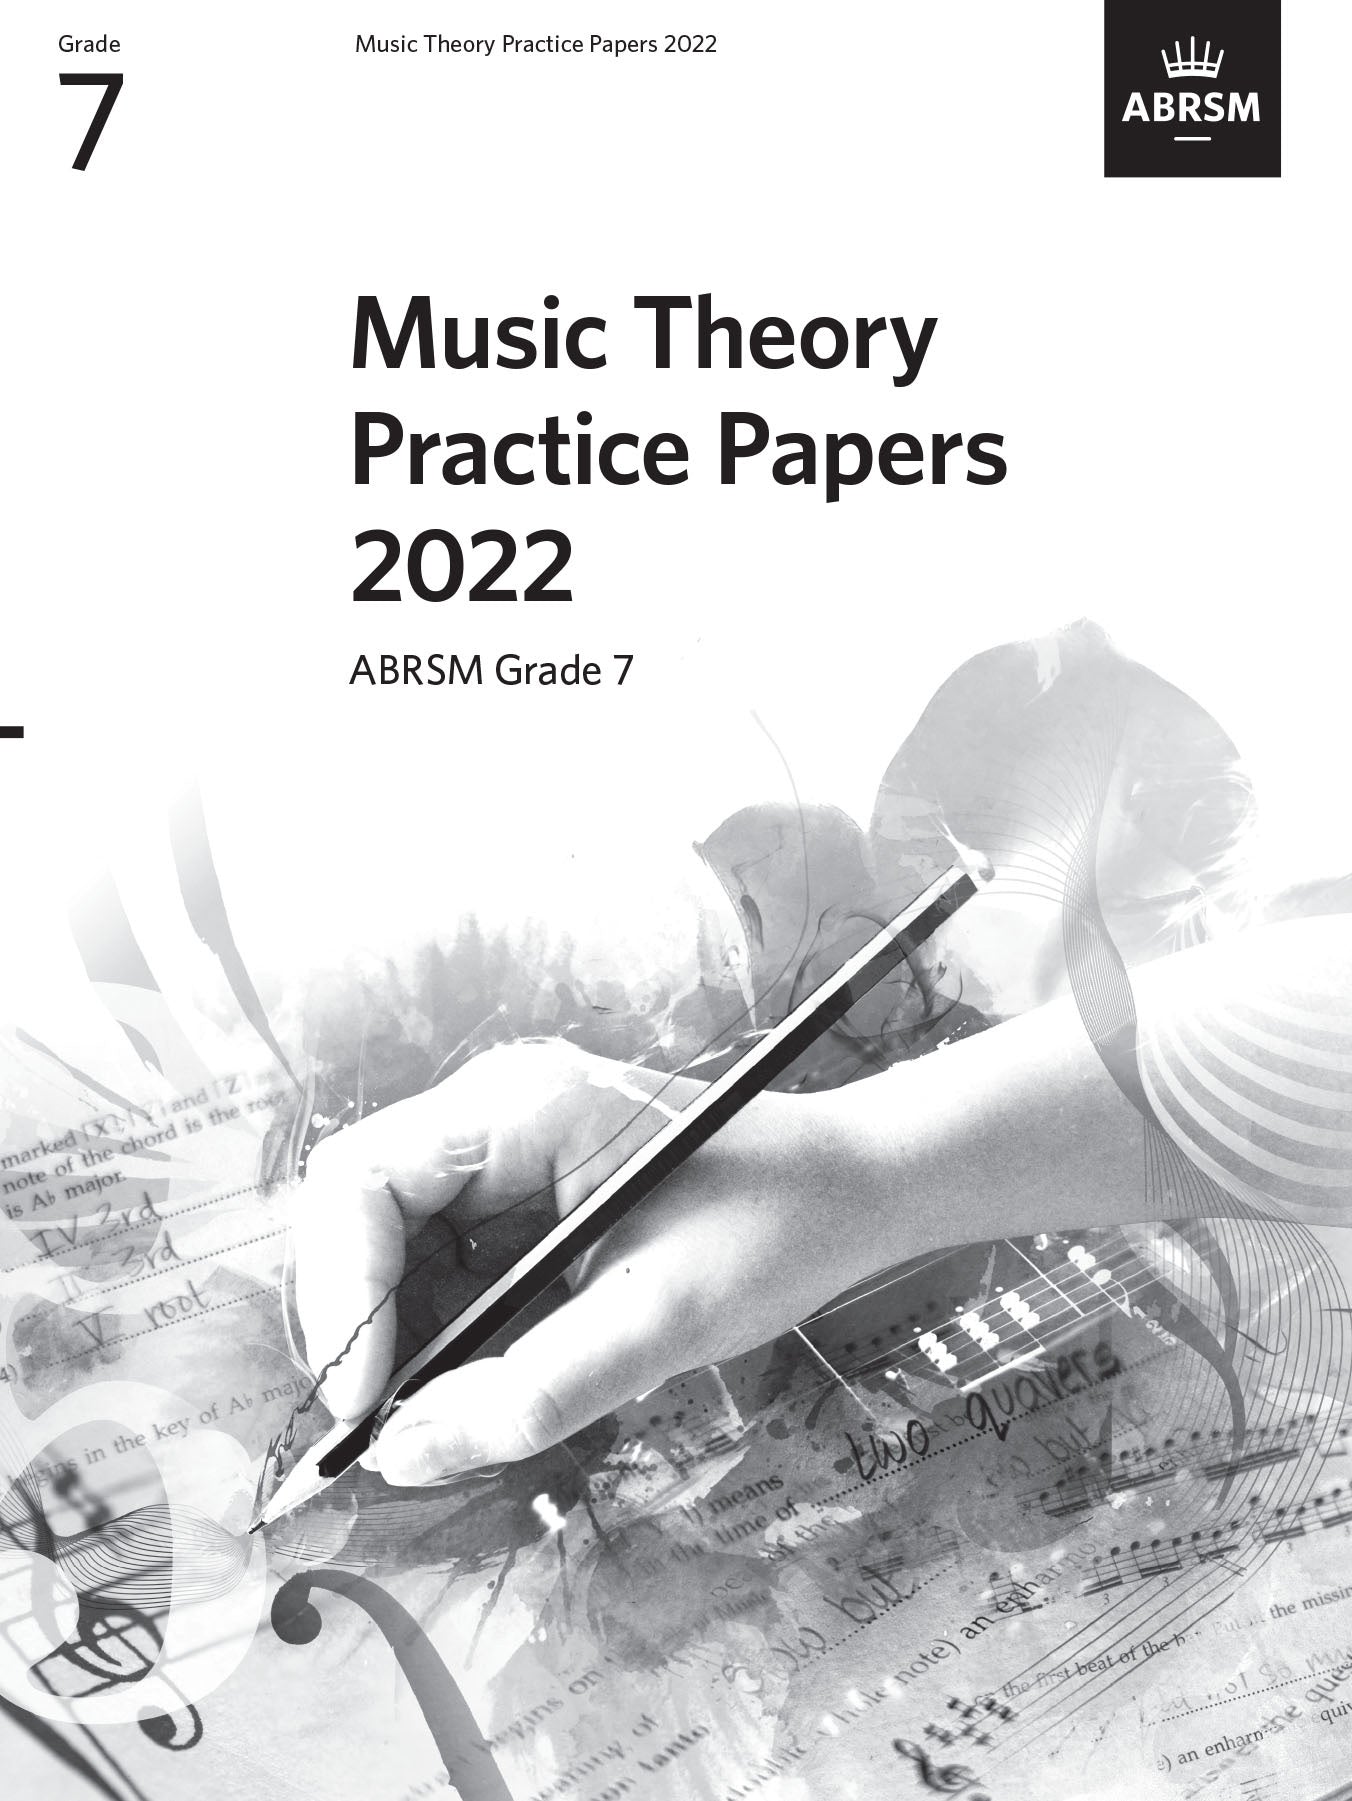 ABRSM Music Theory Practice Papers 2022 Grade 7